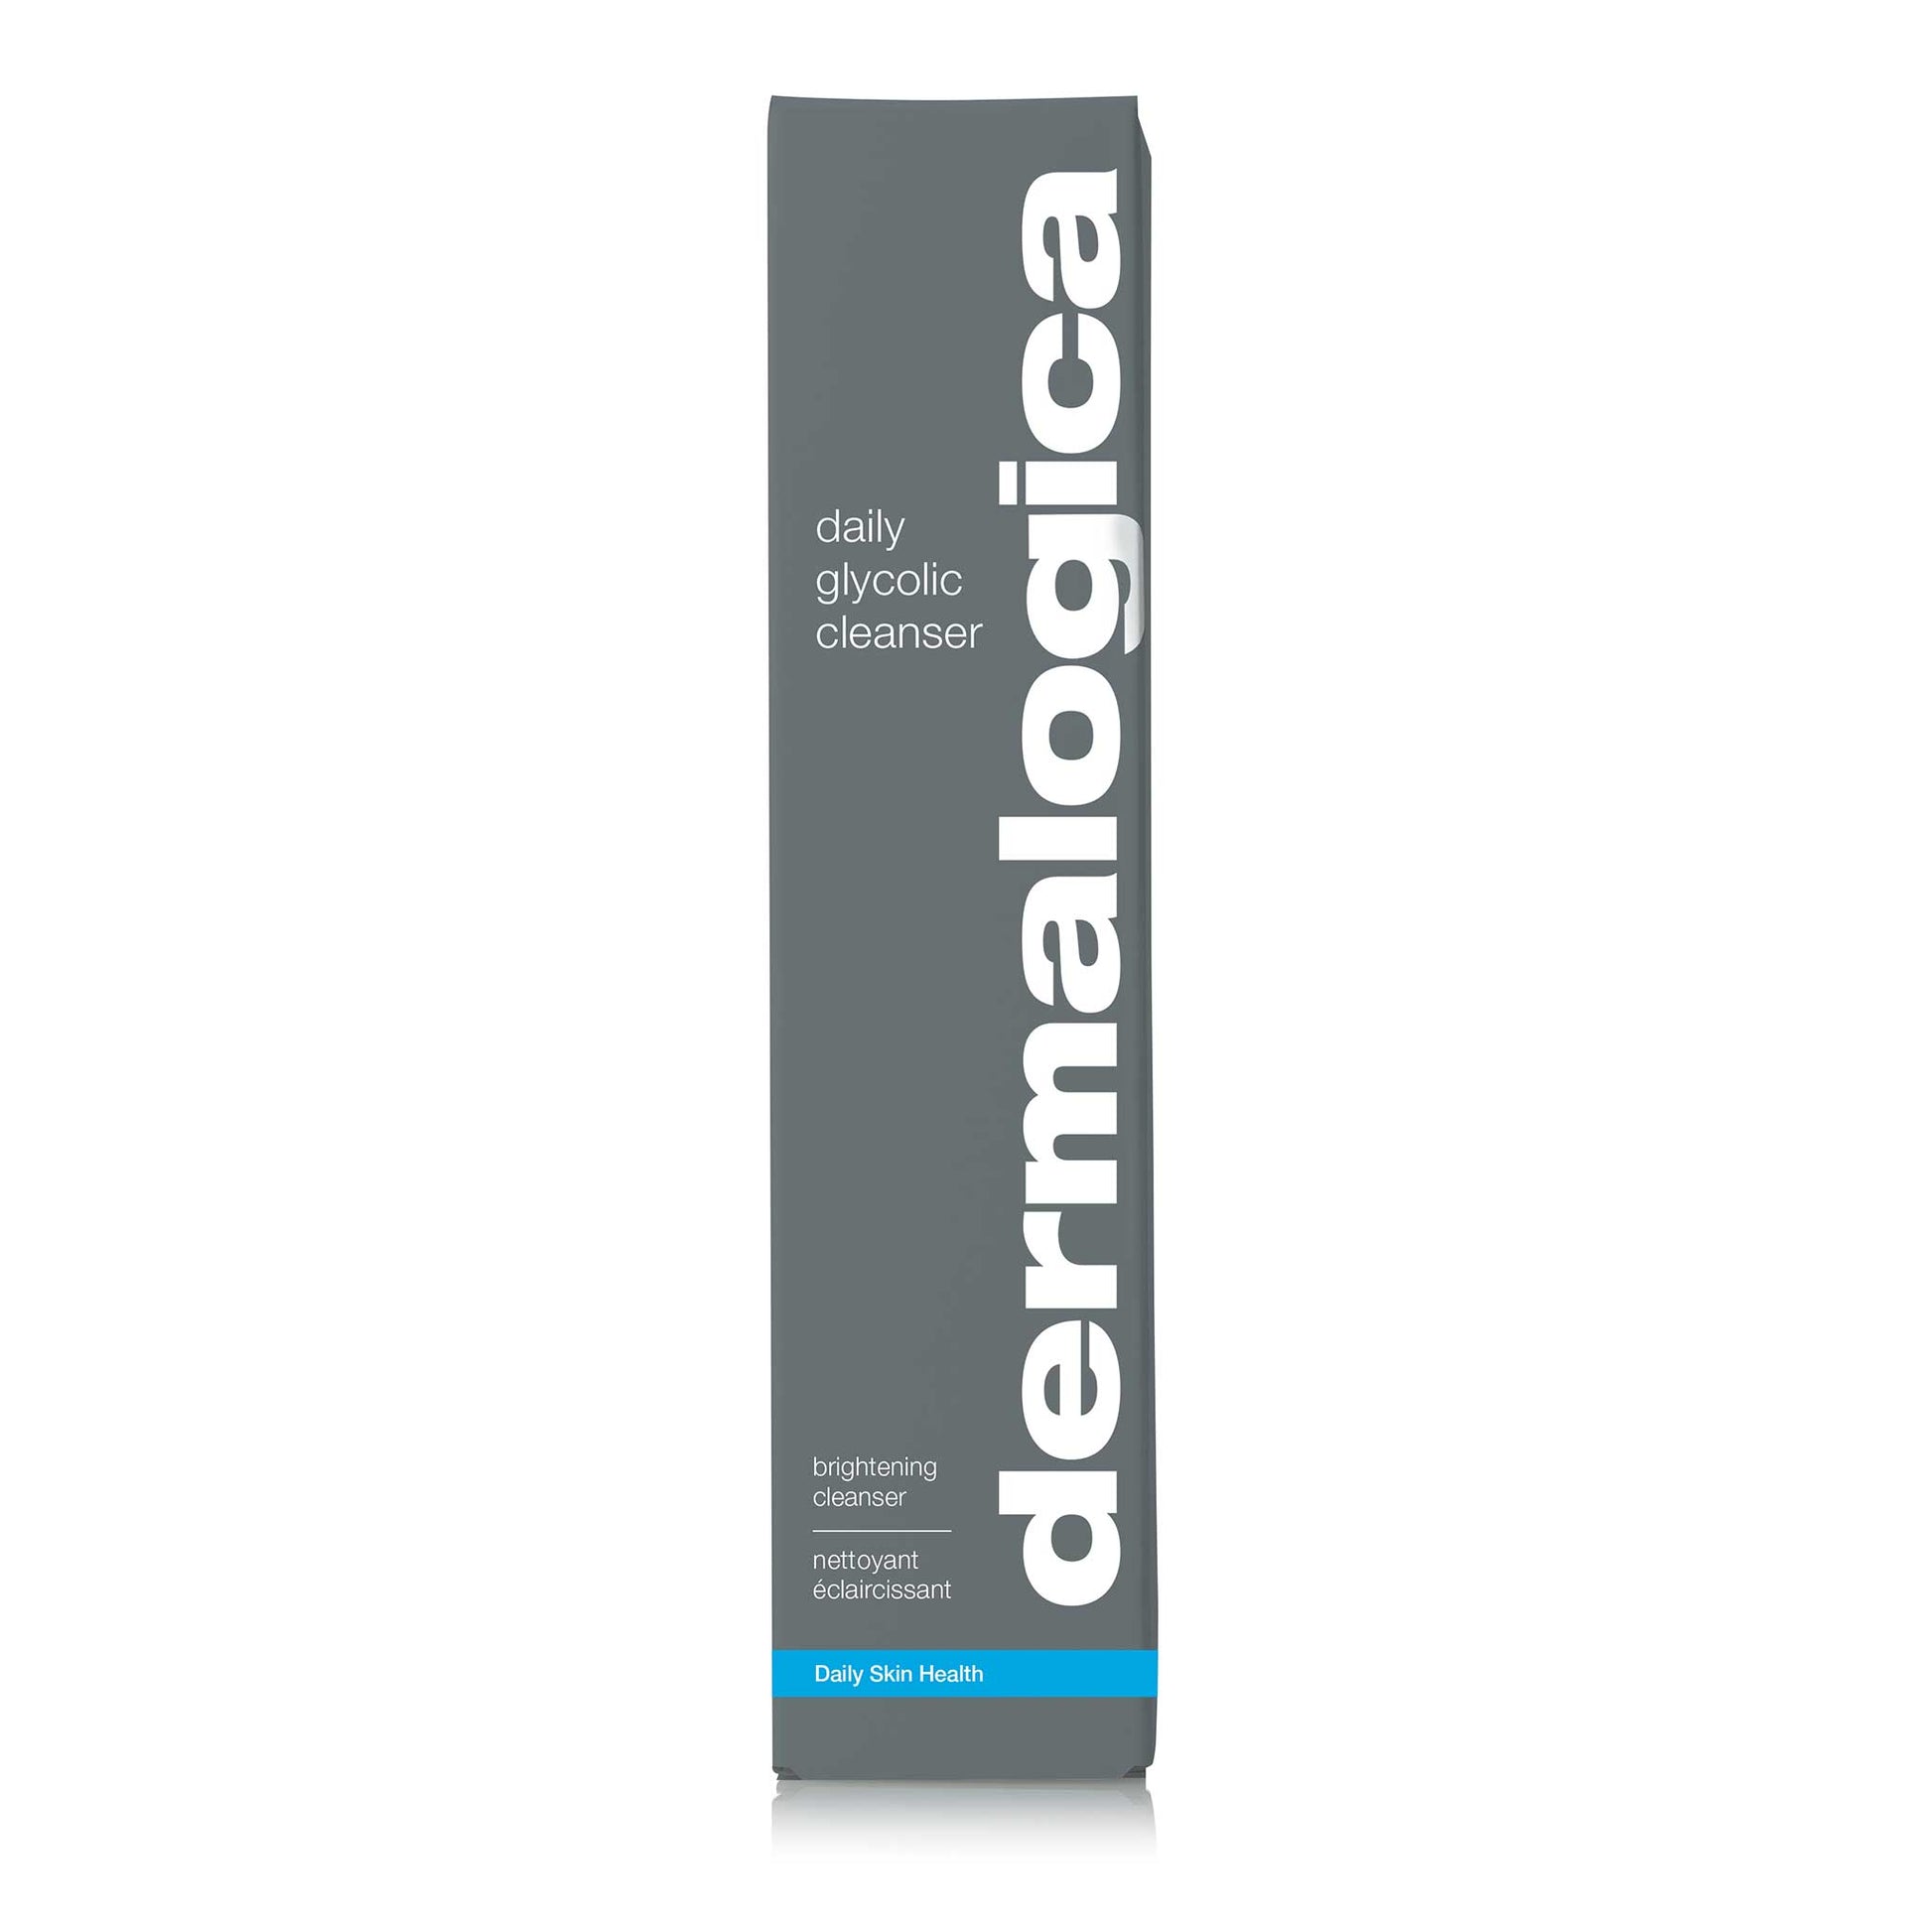 daily glycolic cleanser front of carton